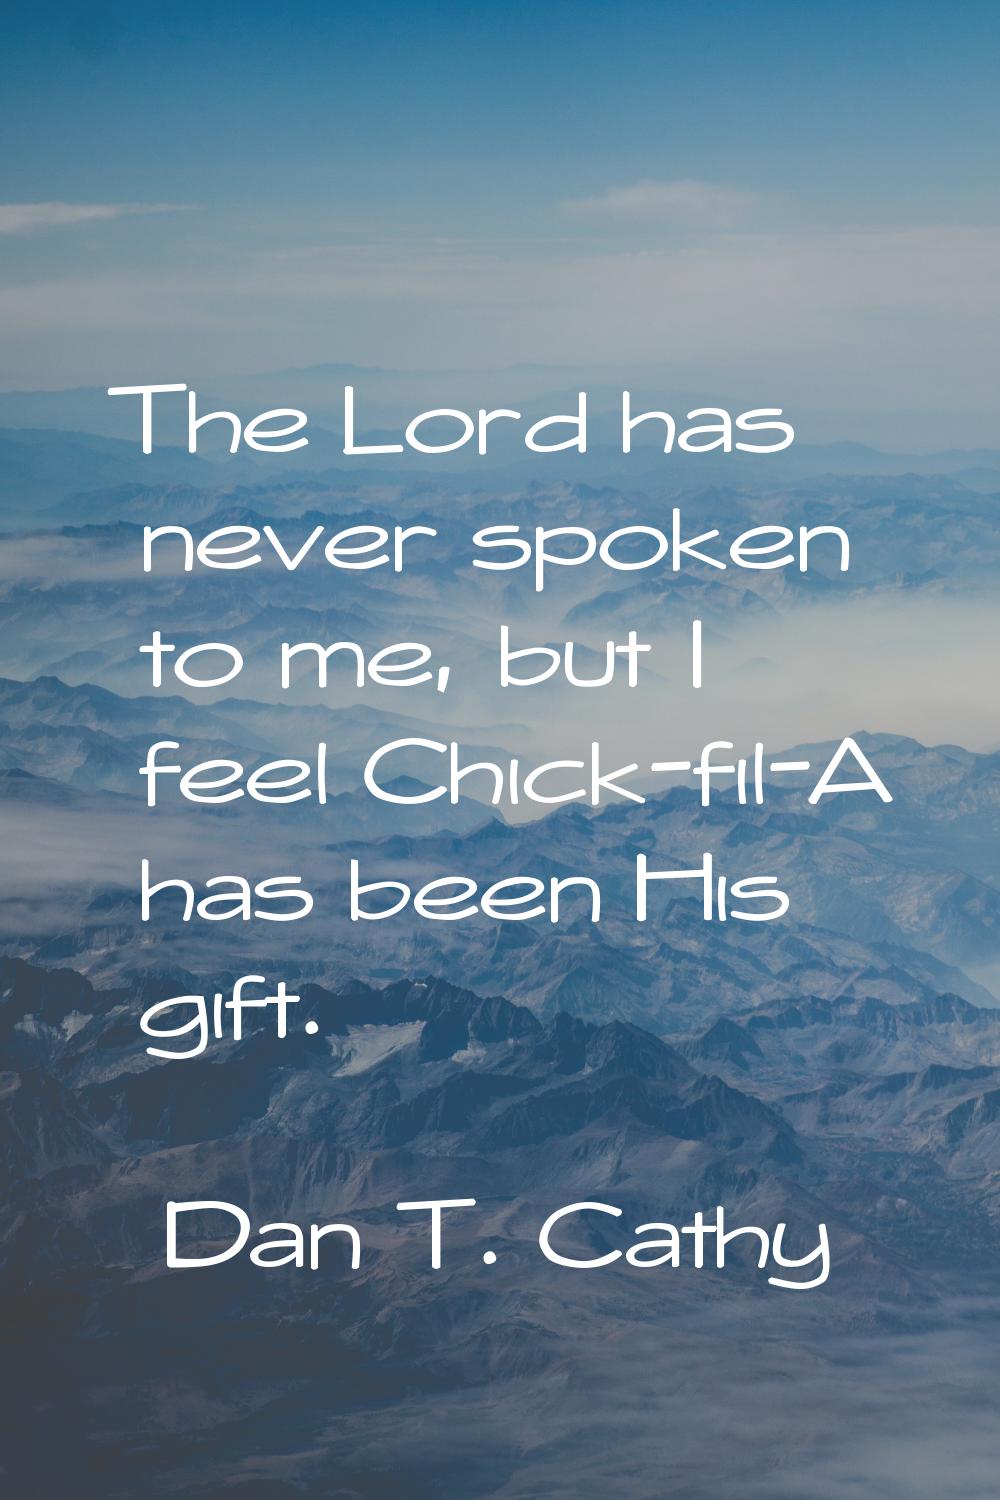 The Lord has never spoken to me, but I feel Chick-fil-A has been His gift.